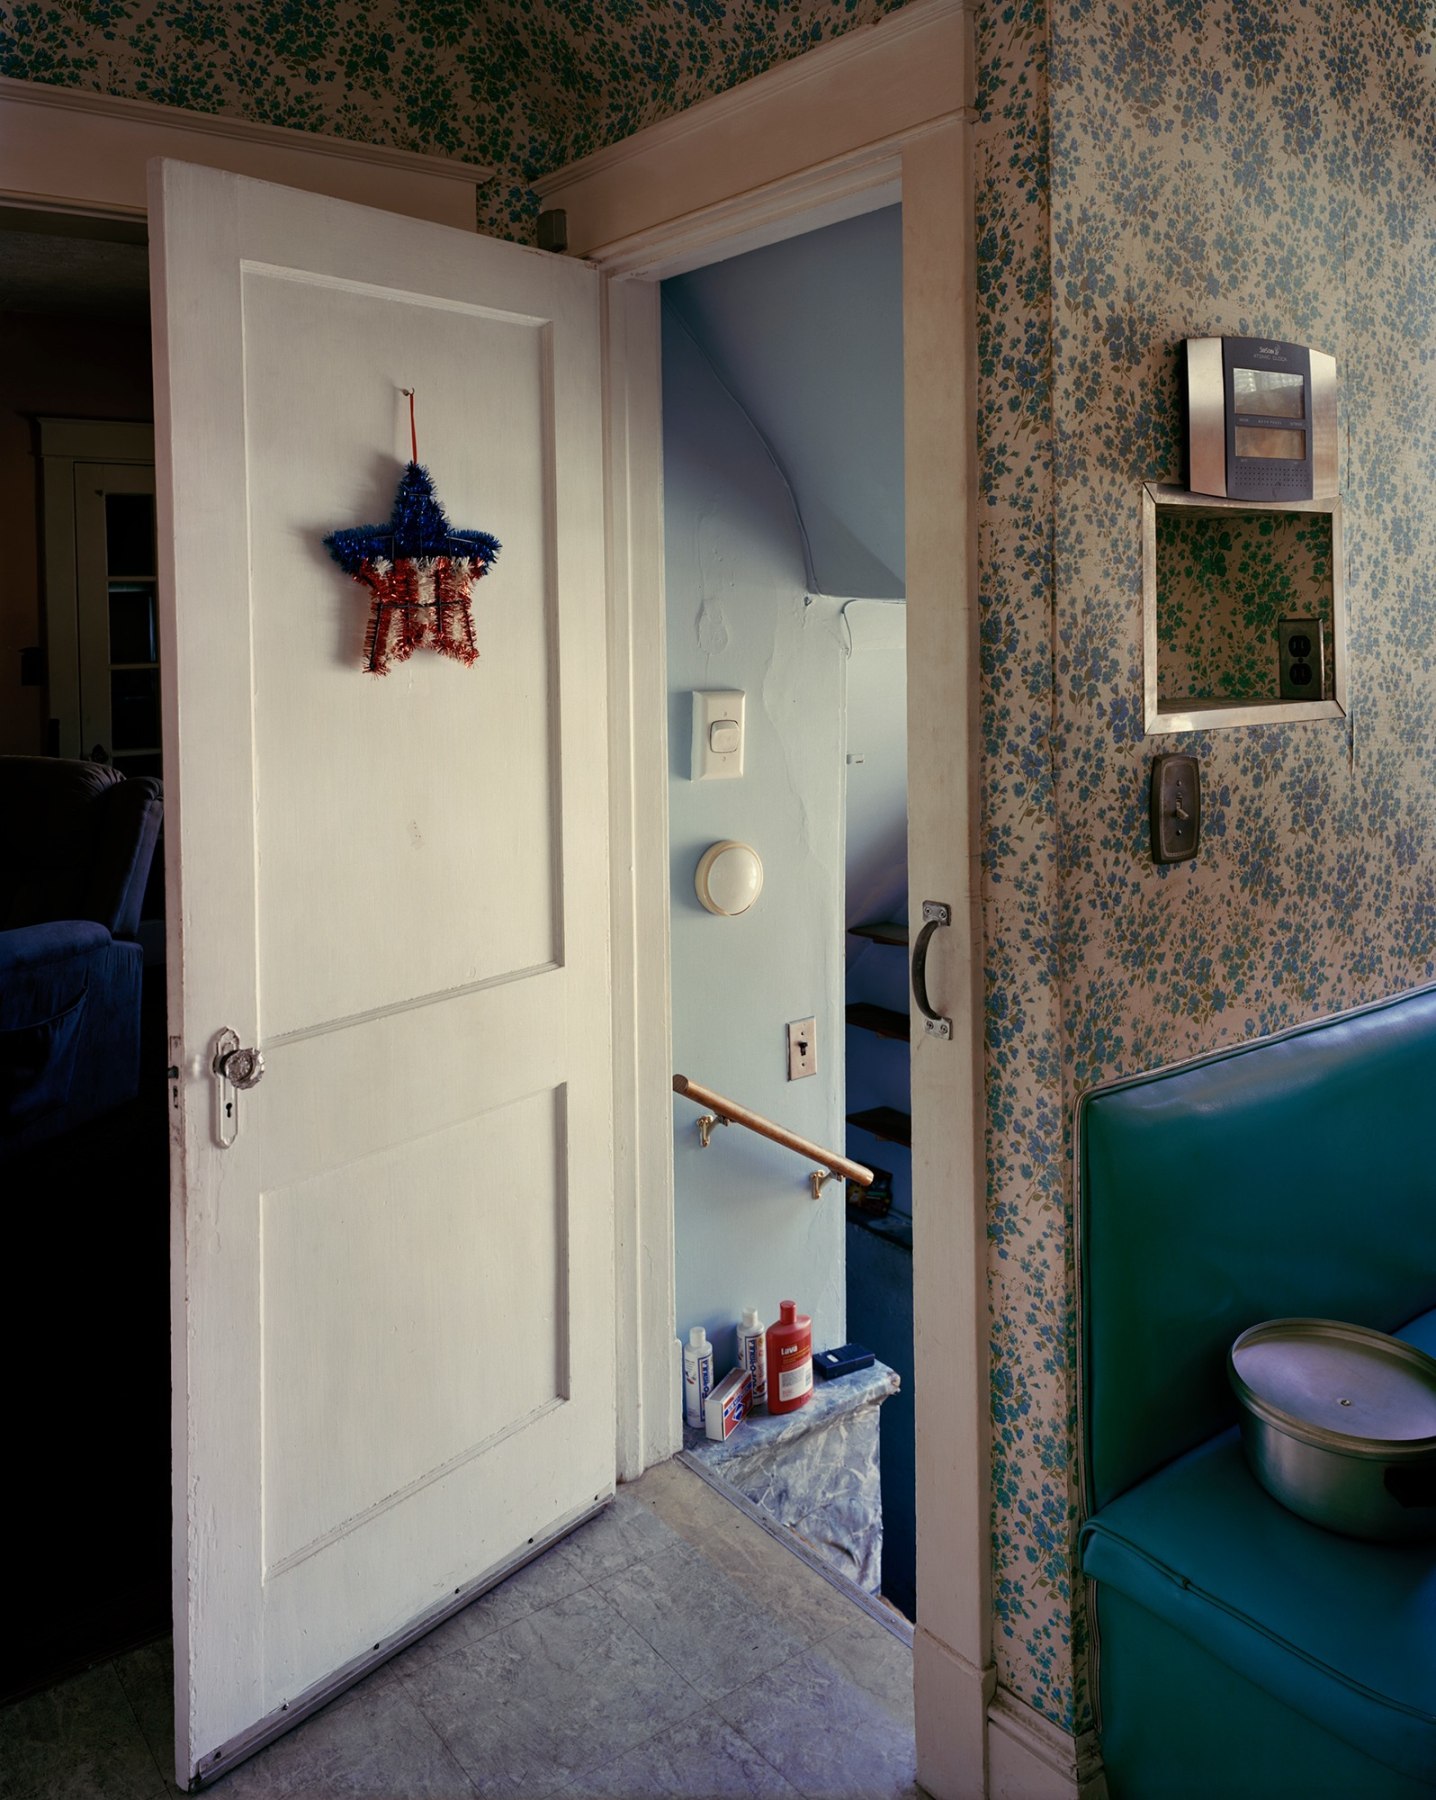 Photograph of interior or house with patterned wallpaper, open door and hanging star, by Jade Doskow